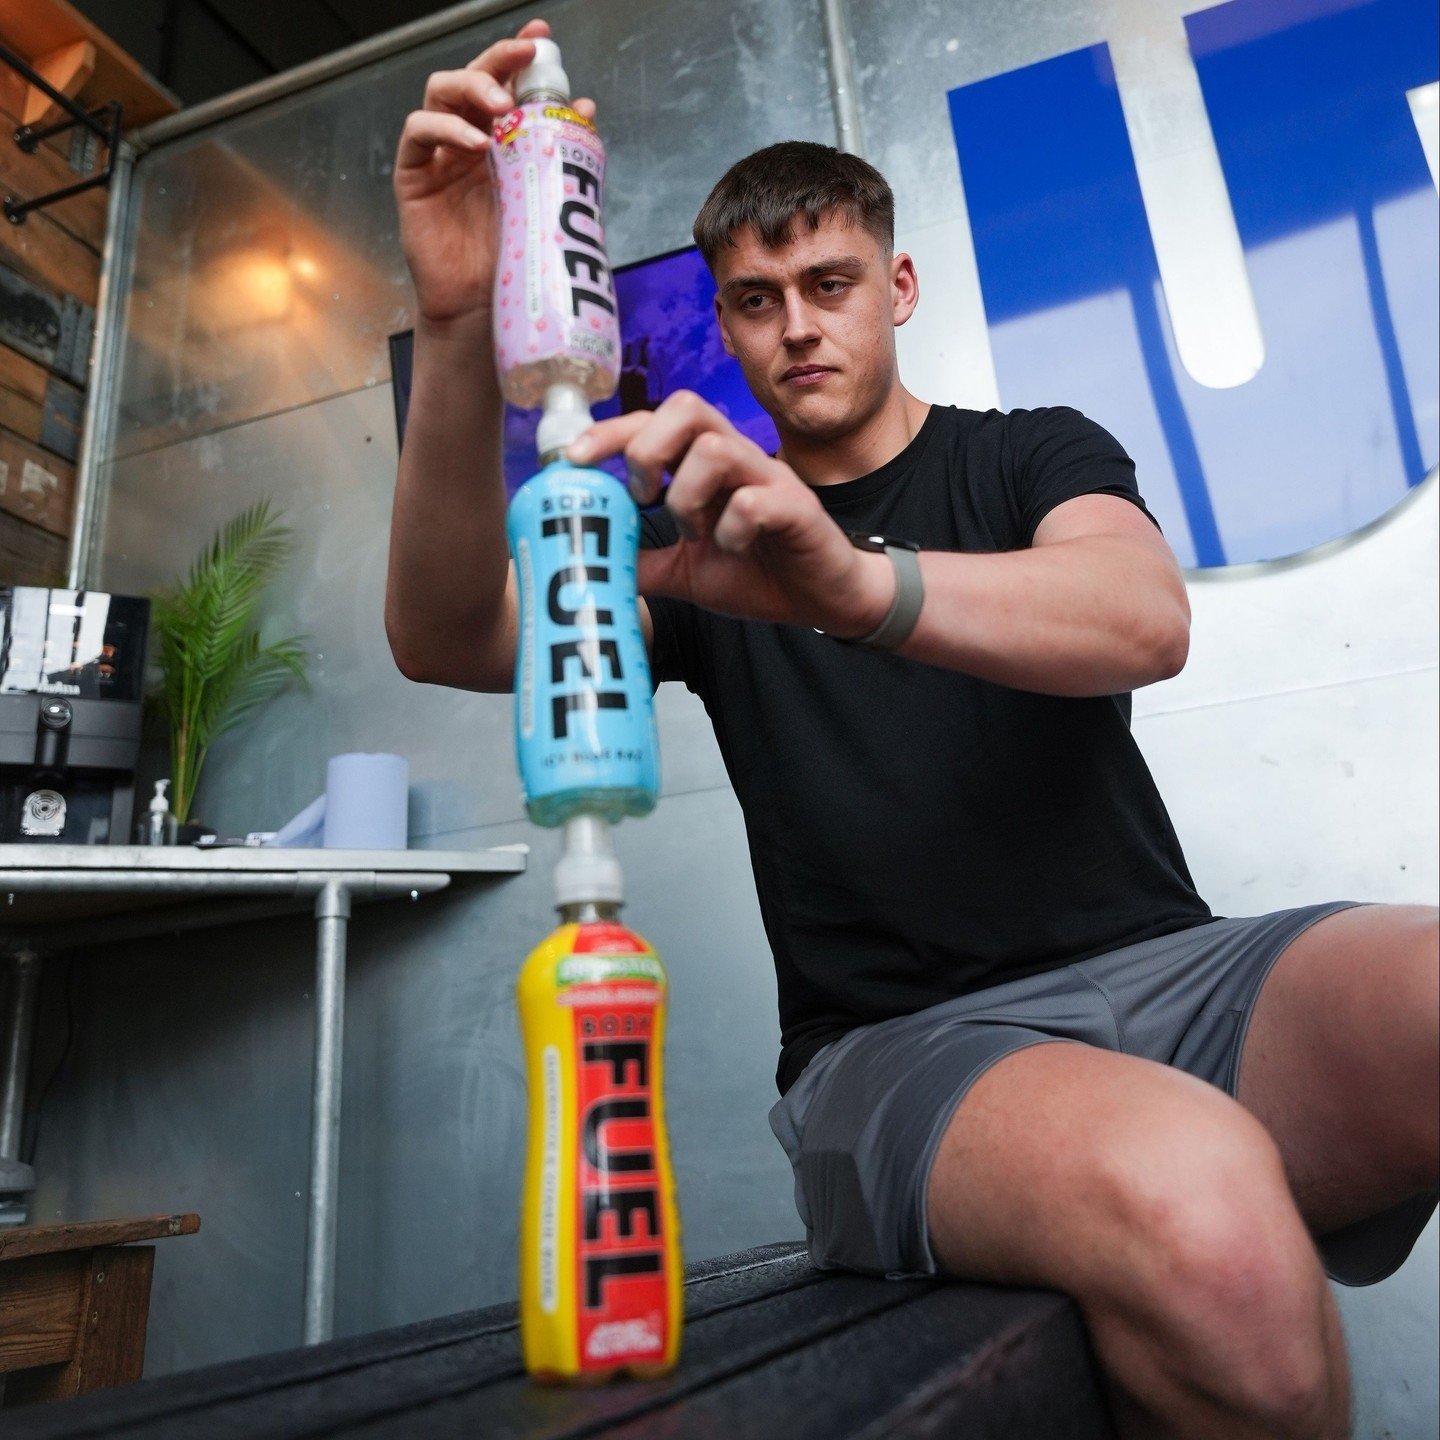 Has anyone noticed the new Applied Nutrition Body Fuel electrolyte drinks in the vending machine? 🤩⁠
⁠
We think these drinks are perfectly balanced (to get you through a workout), and Izaak clearly took this literally. Bless him. Silly Sausage. Terr